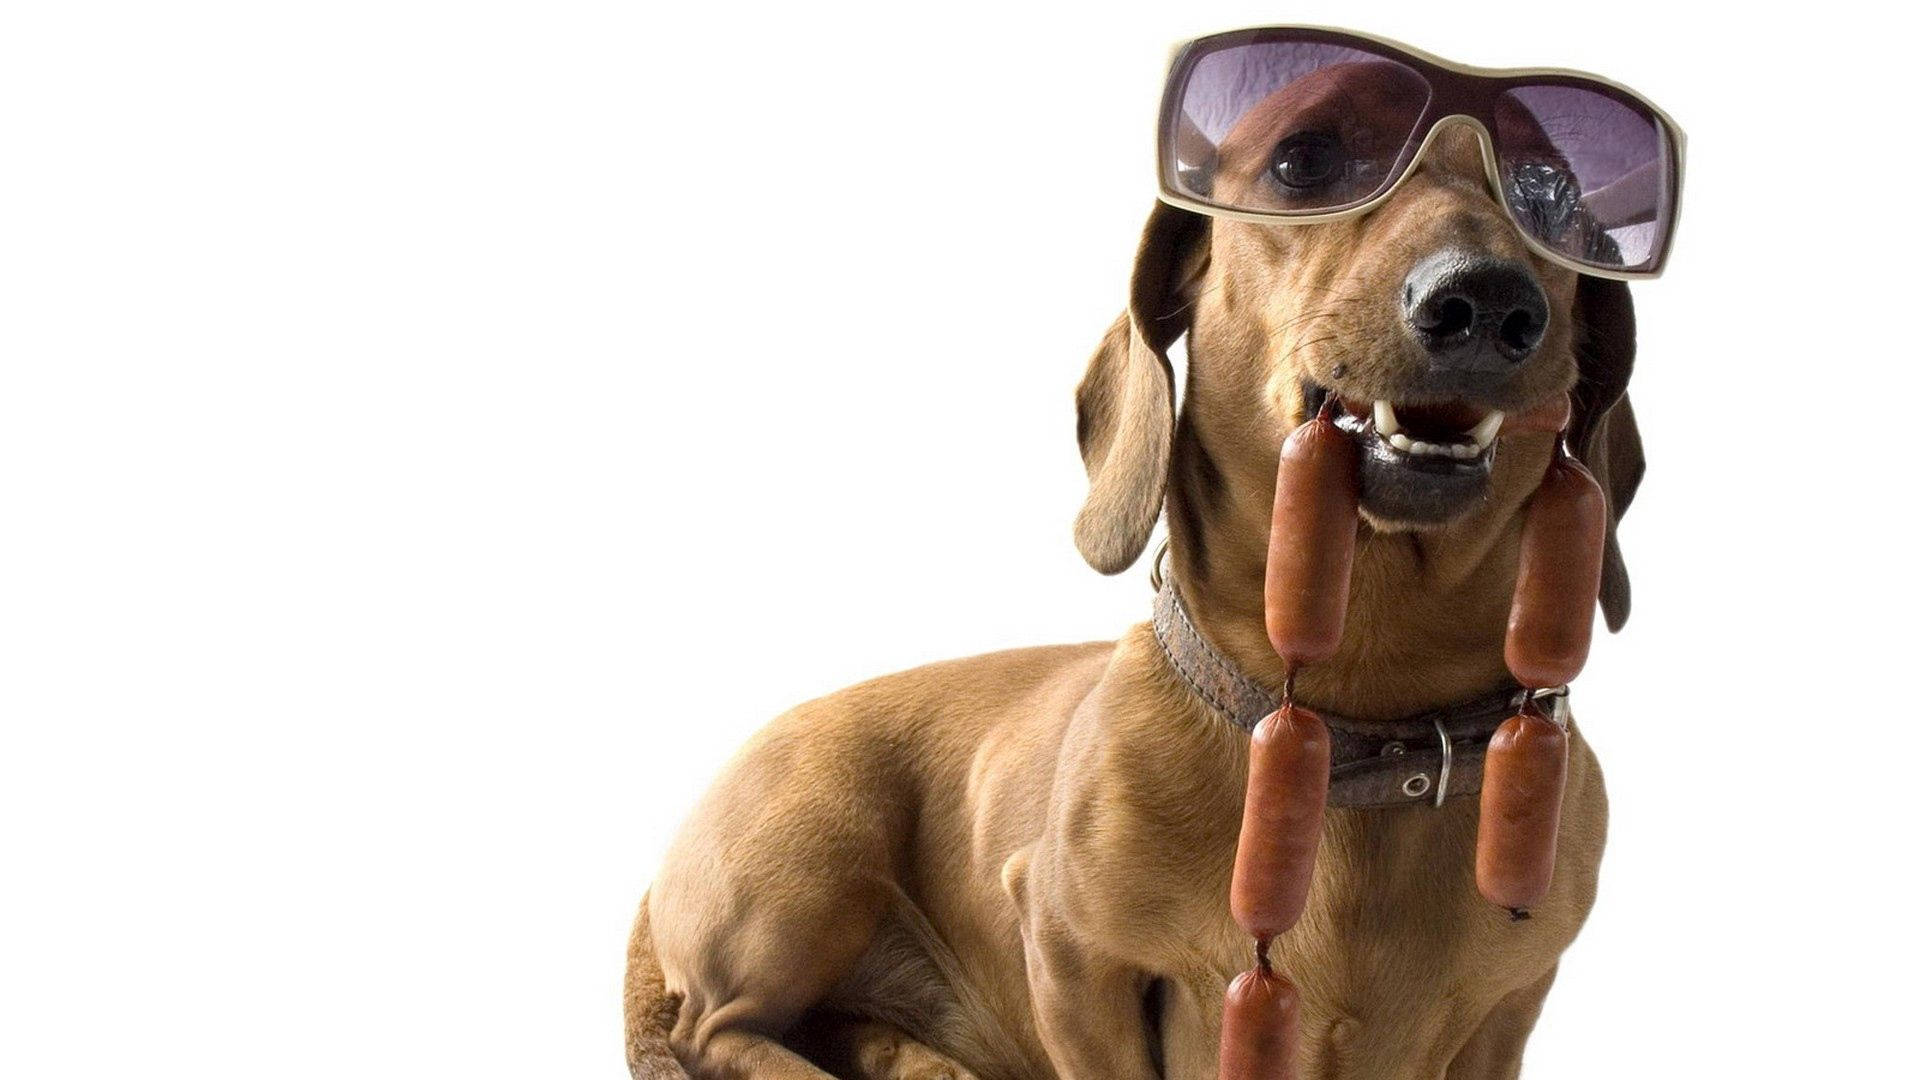 Cool Dachshund Dog With Sunglasses Background